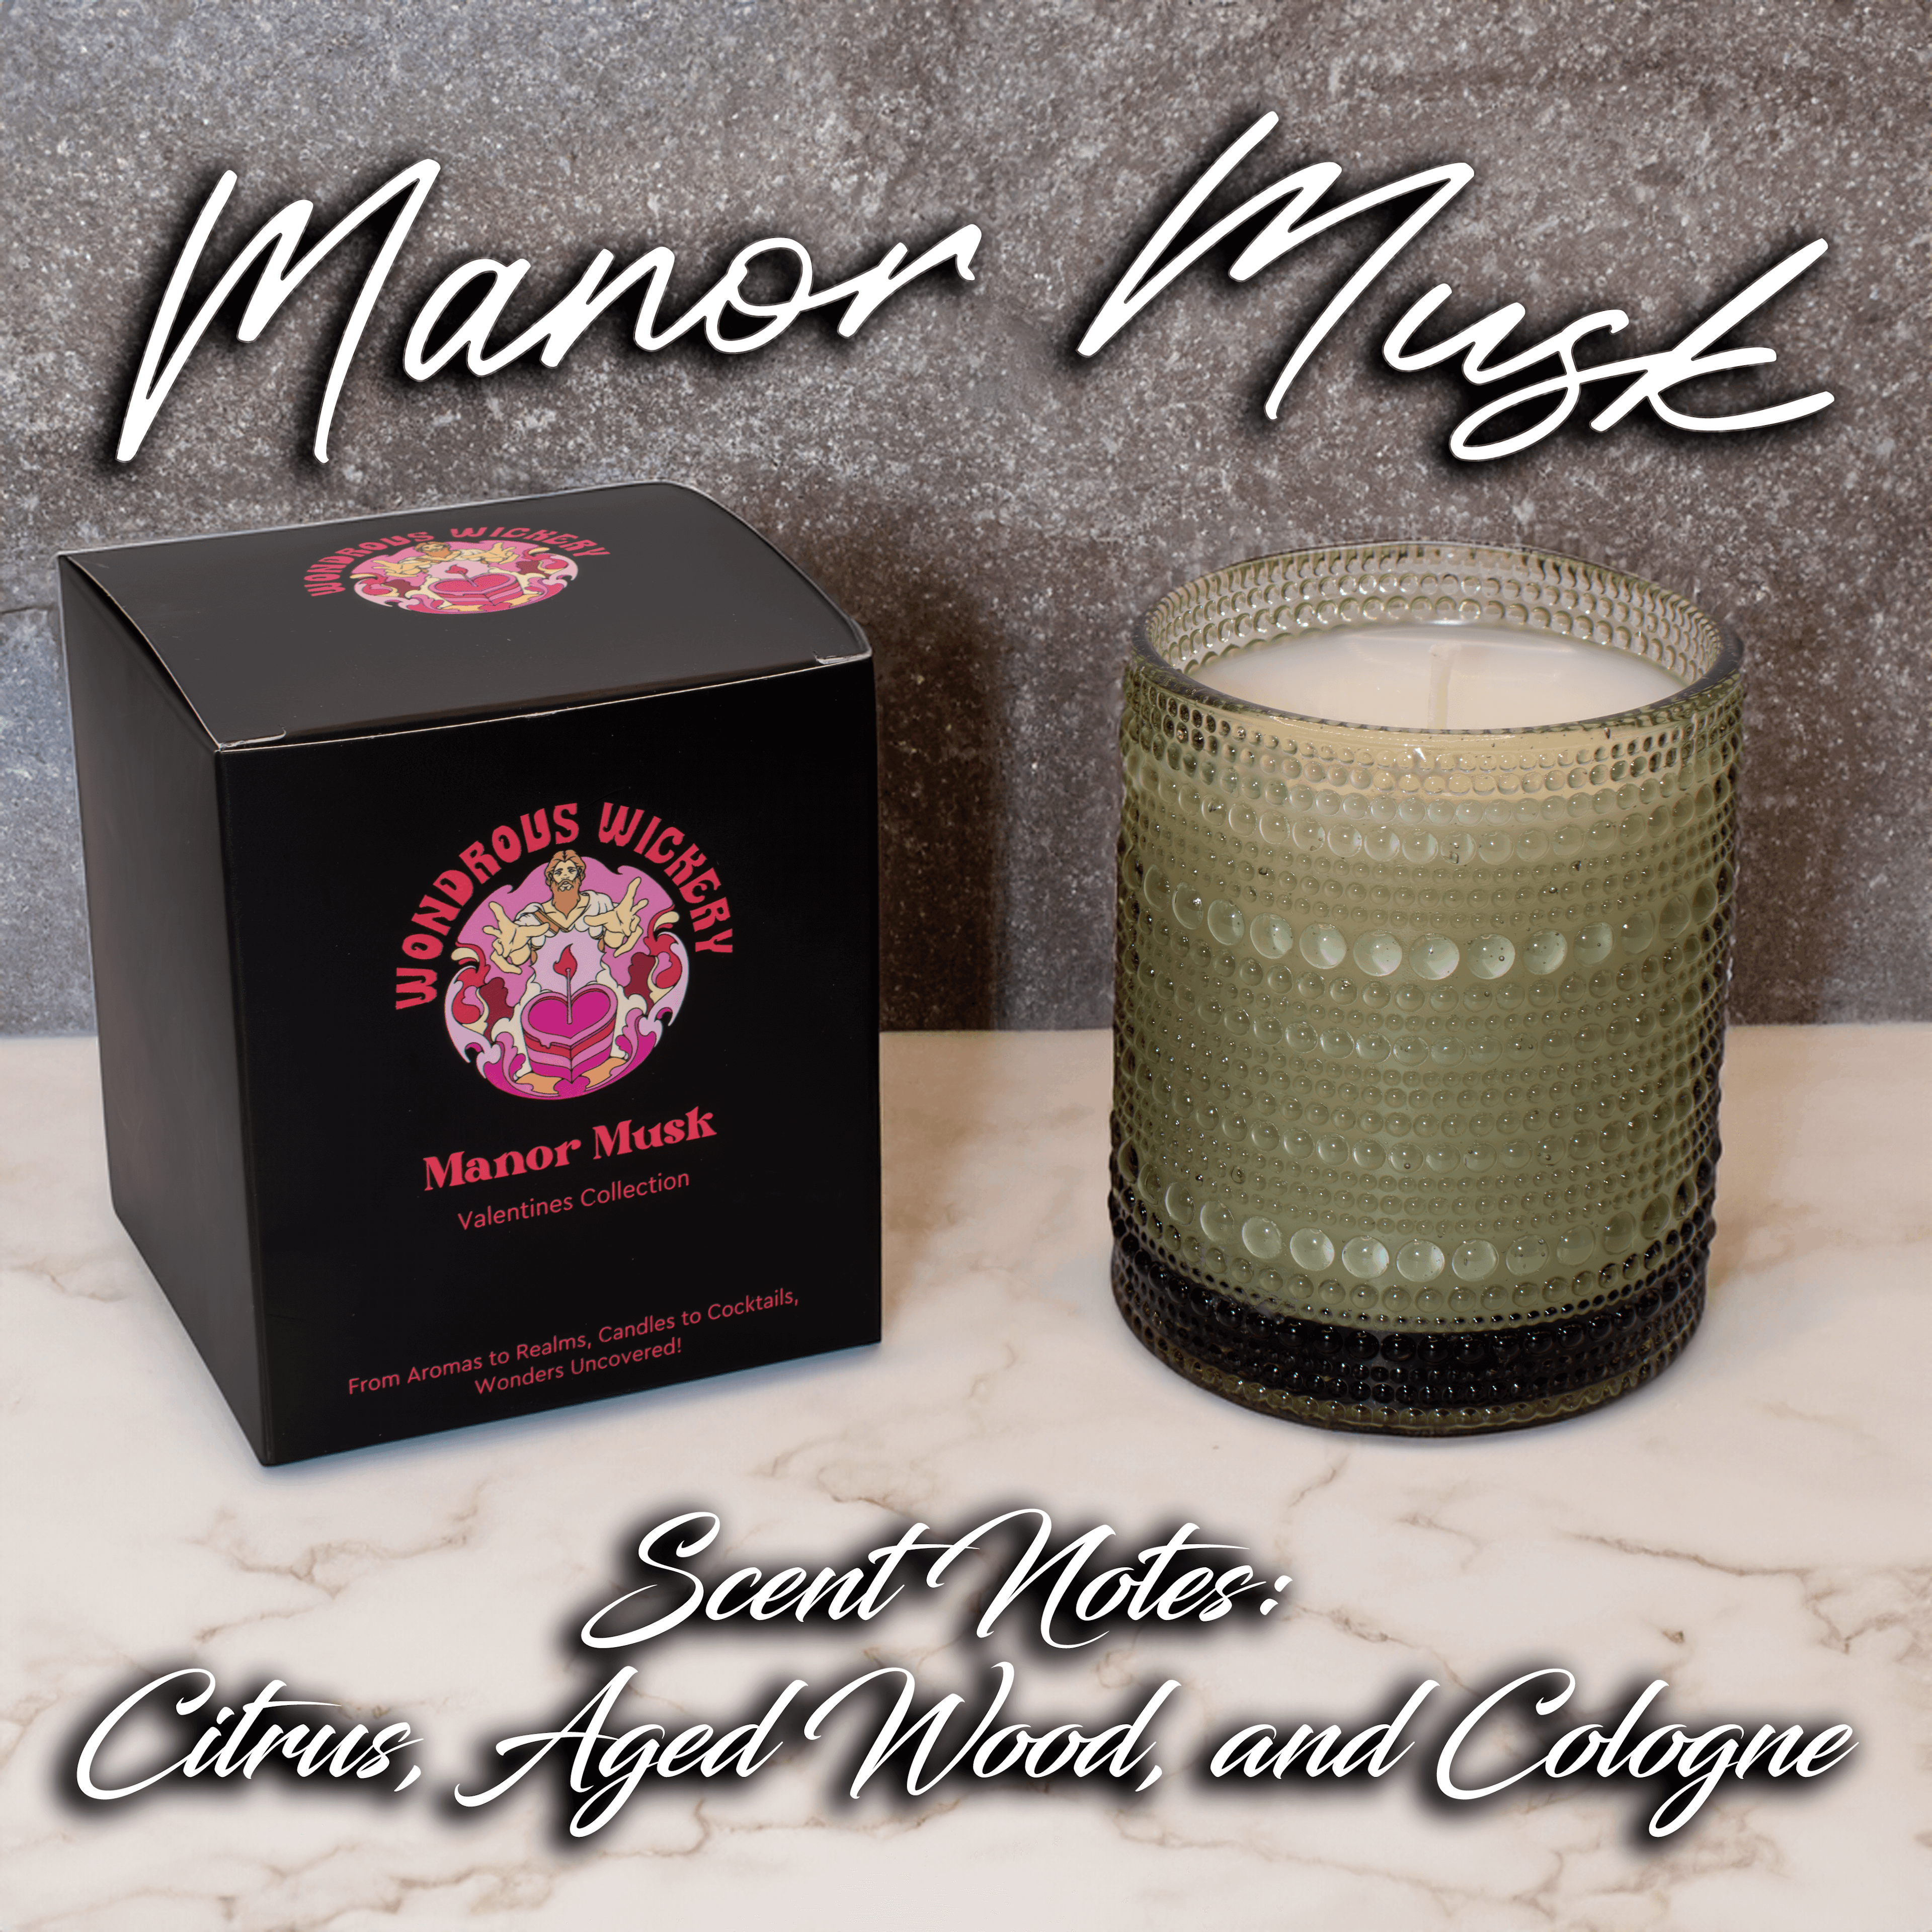 Manor Musk Candle / Candle to Cocktail Experience / Valentines Collection / LIMITED Edition / Unique Candle Gift / Candles - undefined - Wondrous Wickery